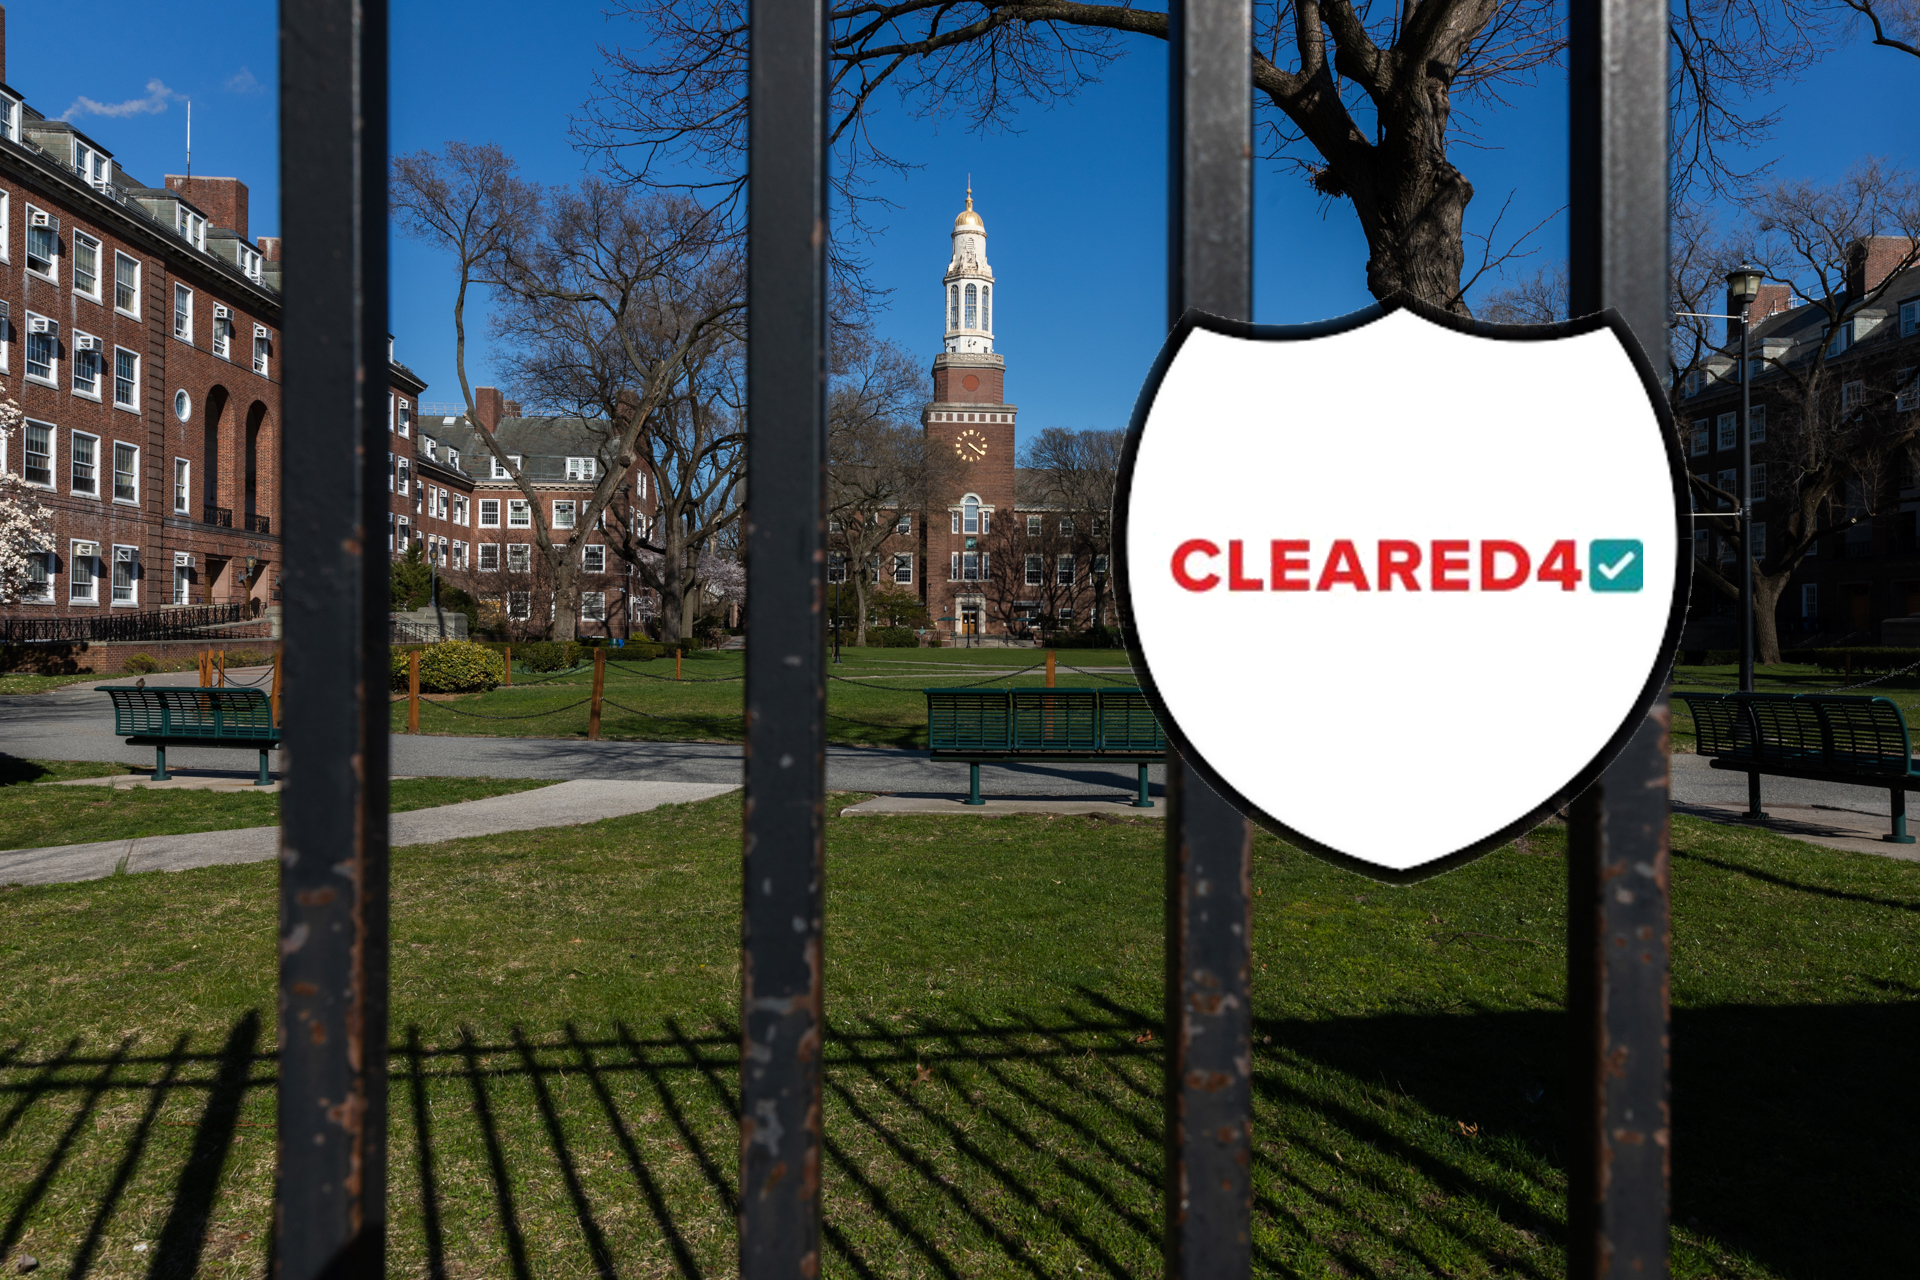 BC's Zip Code Among 9 to See Closure – The Brooklyn College Vanguard